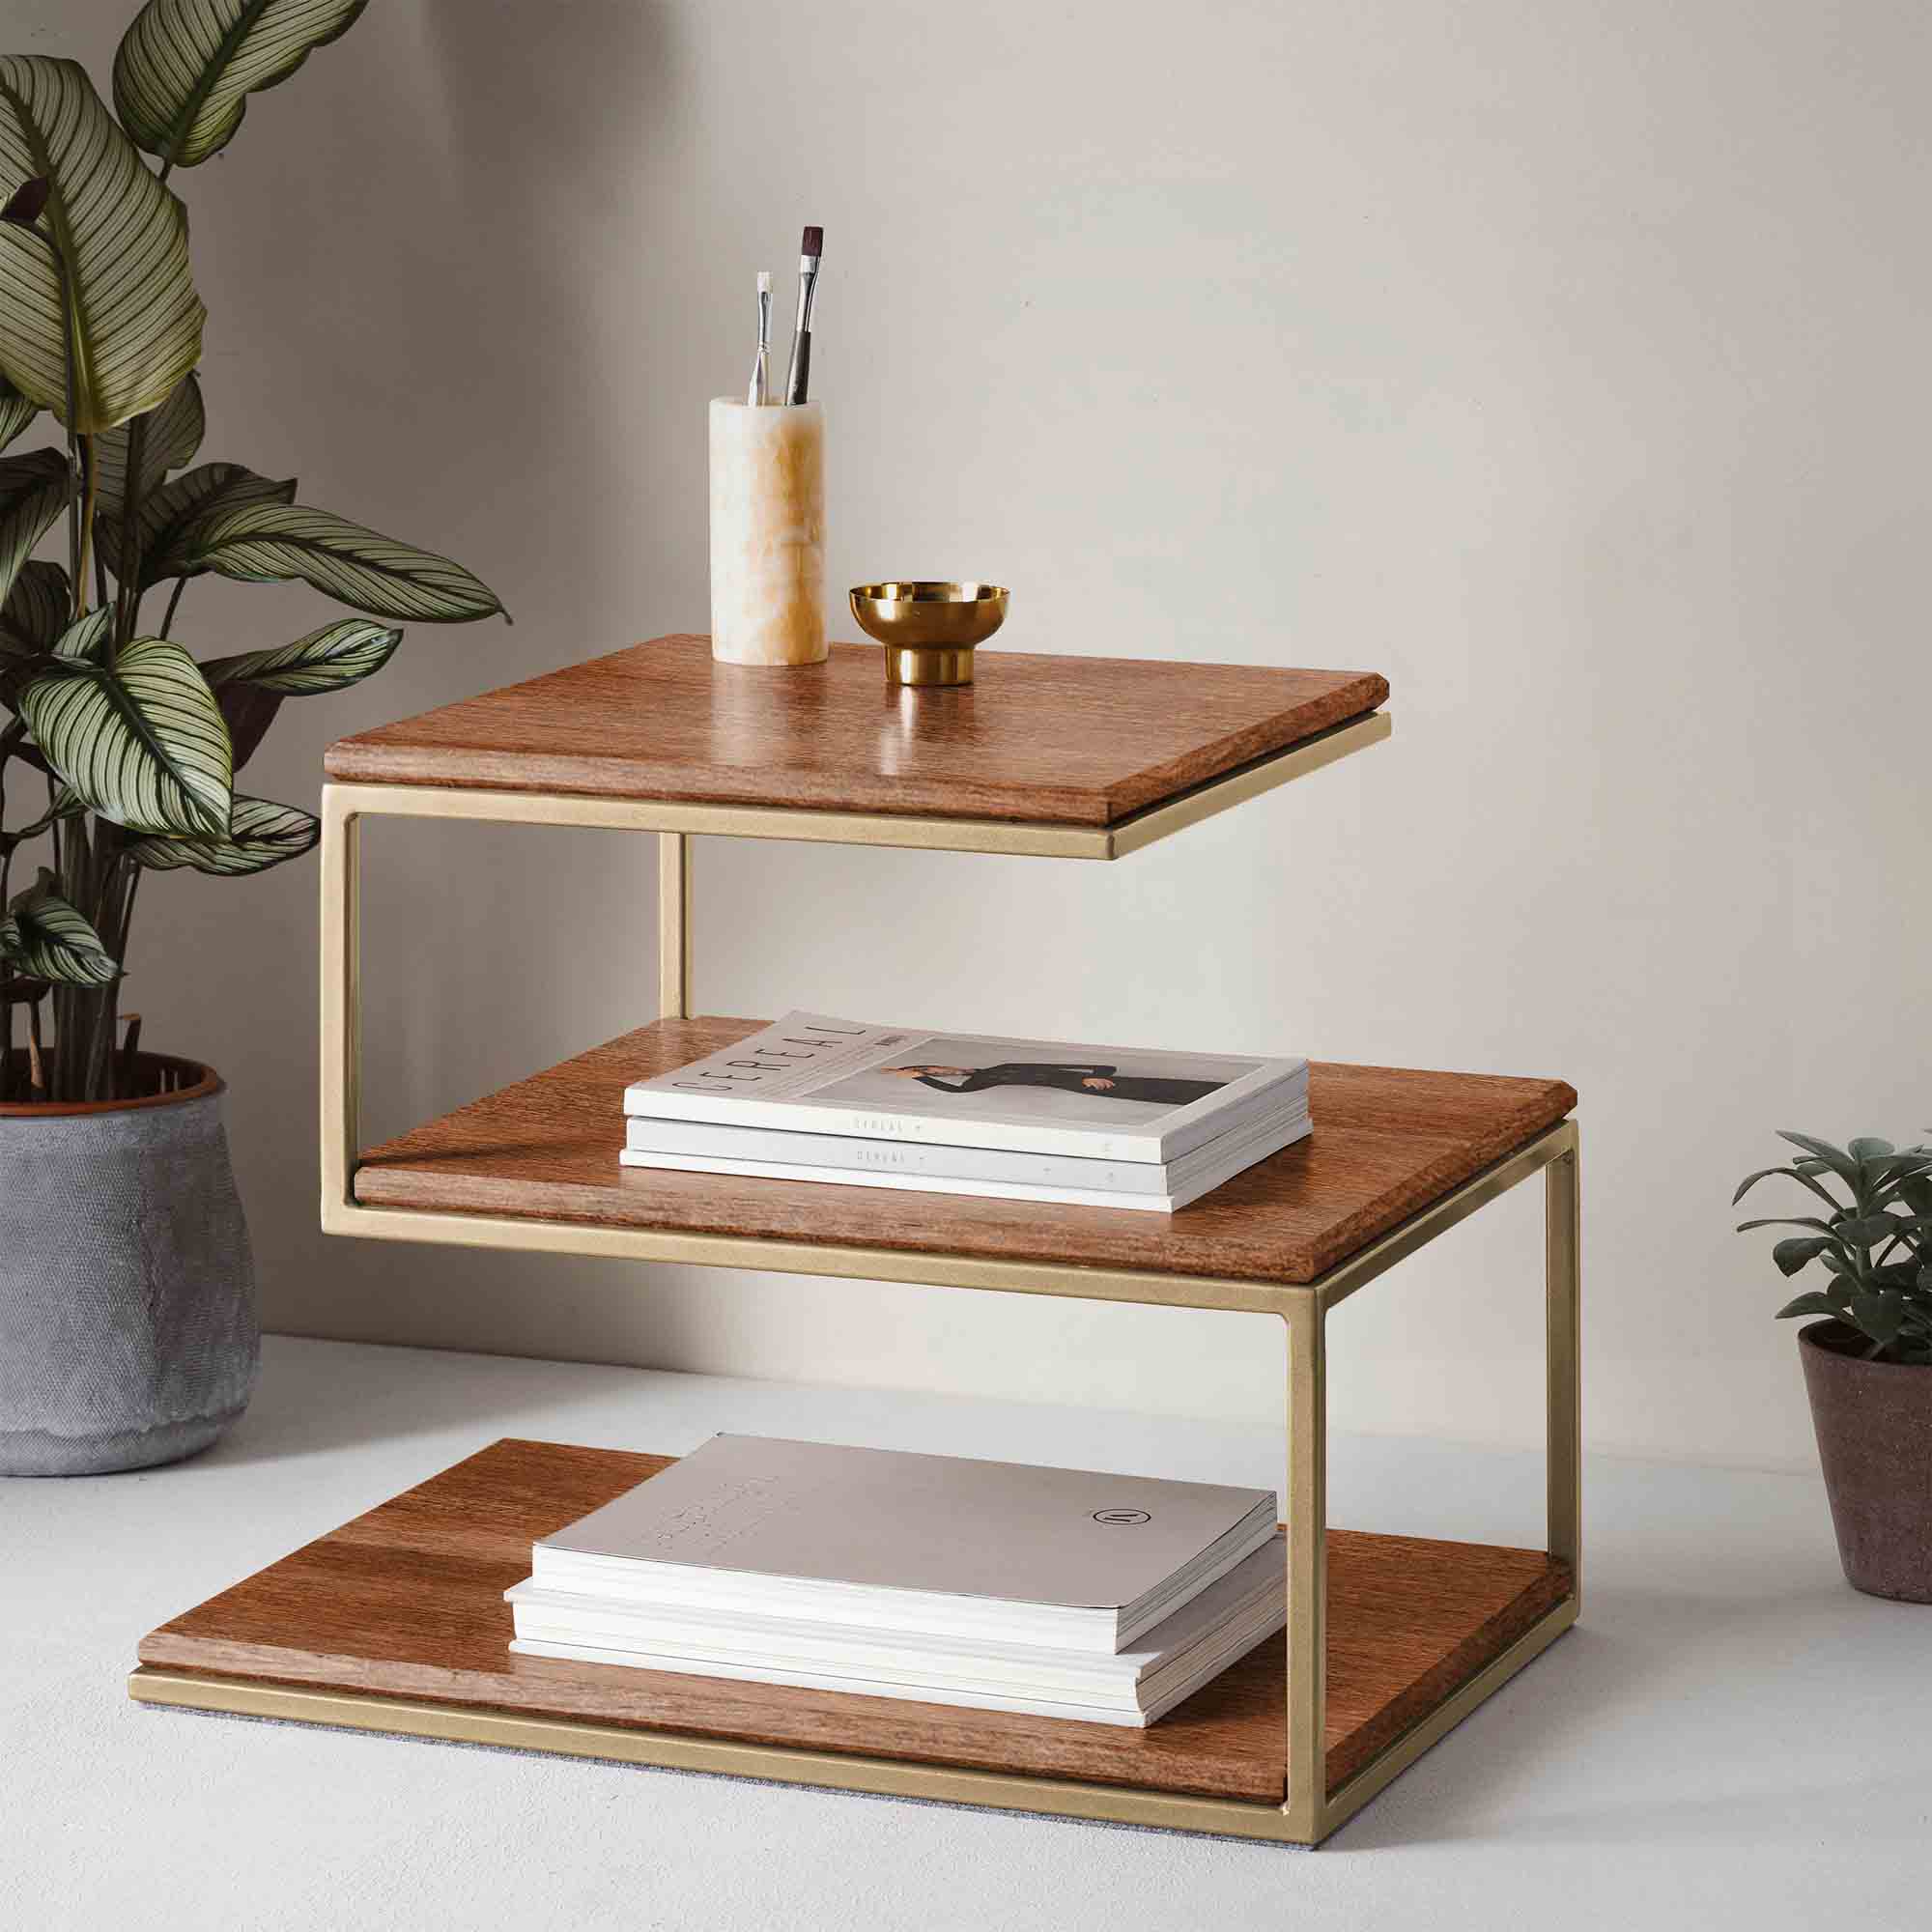 Layer Table, Beech Wood, Walnut Colour yellow frame, interior view, with books